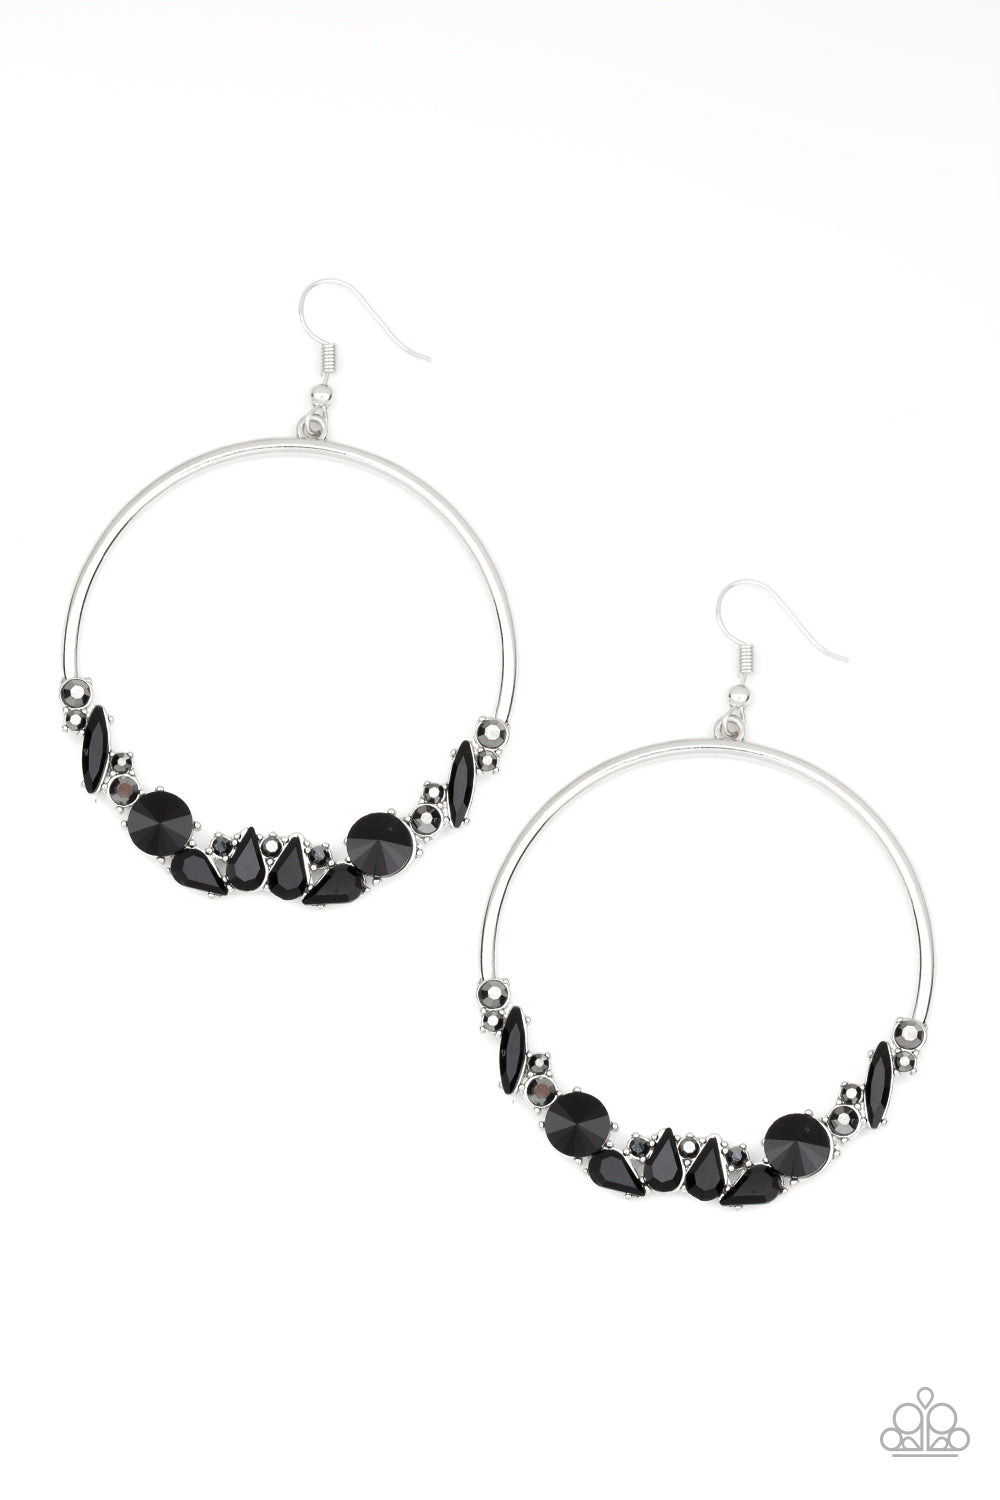 Paparazzi Accessories - Business Casual - Black Earrings